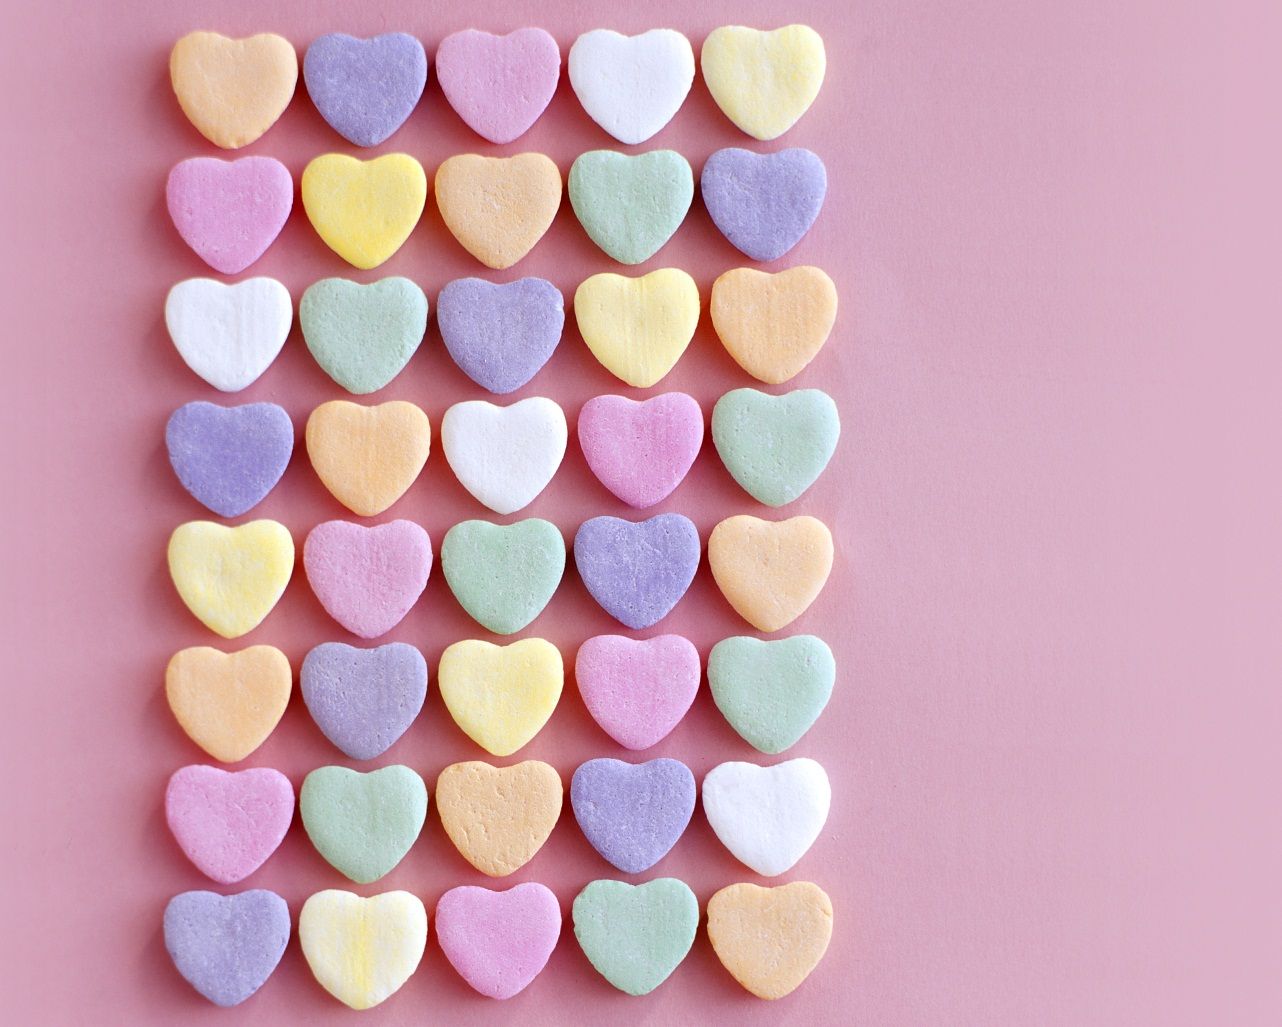 Candy Hearts Wallpaper Images  Free Download on Freepik